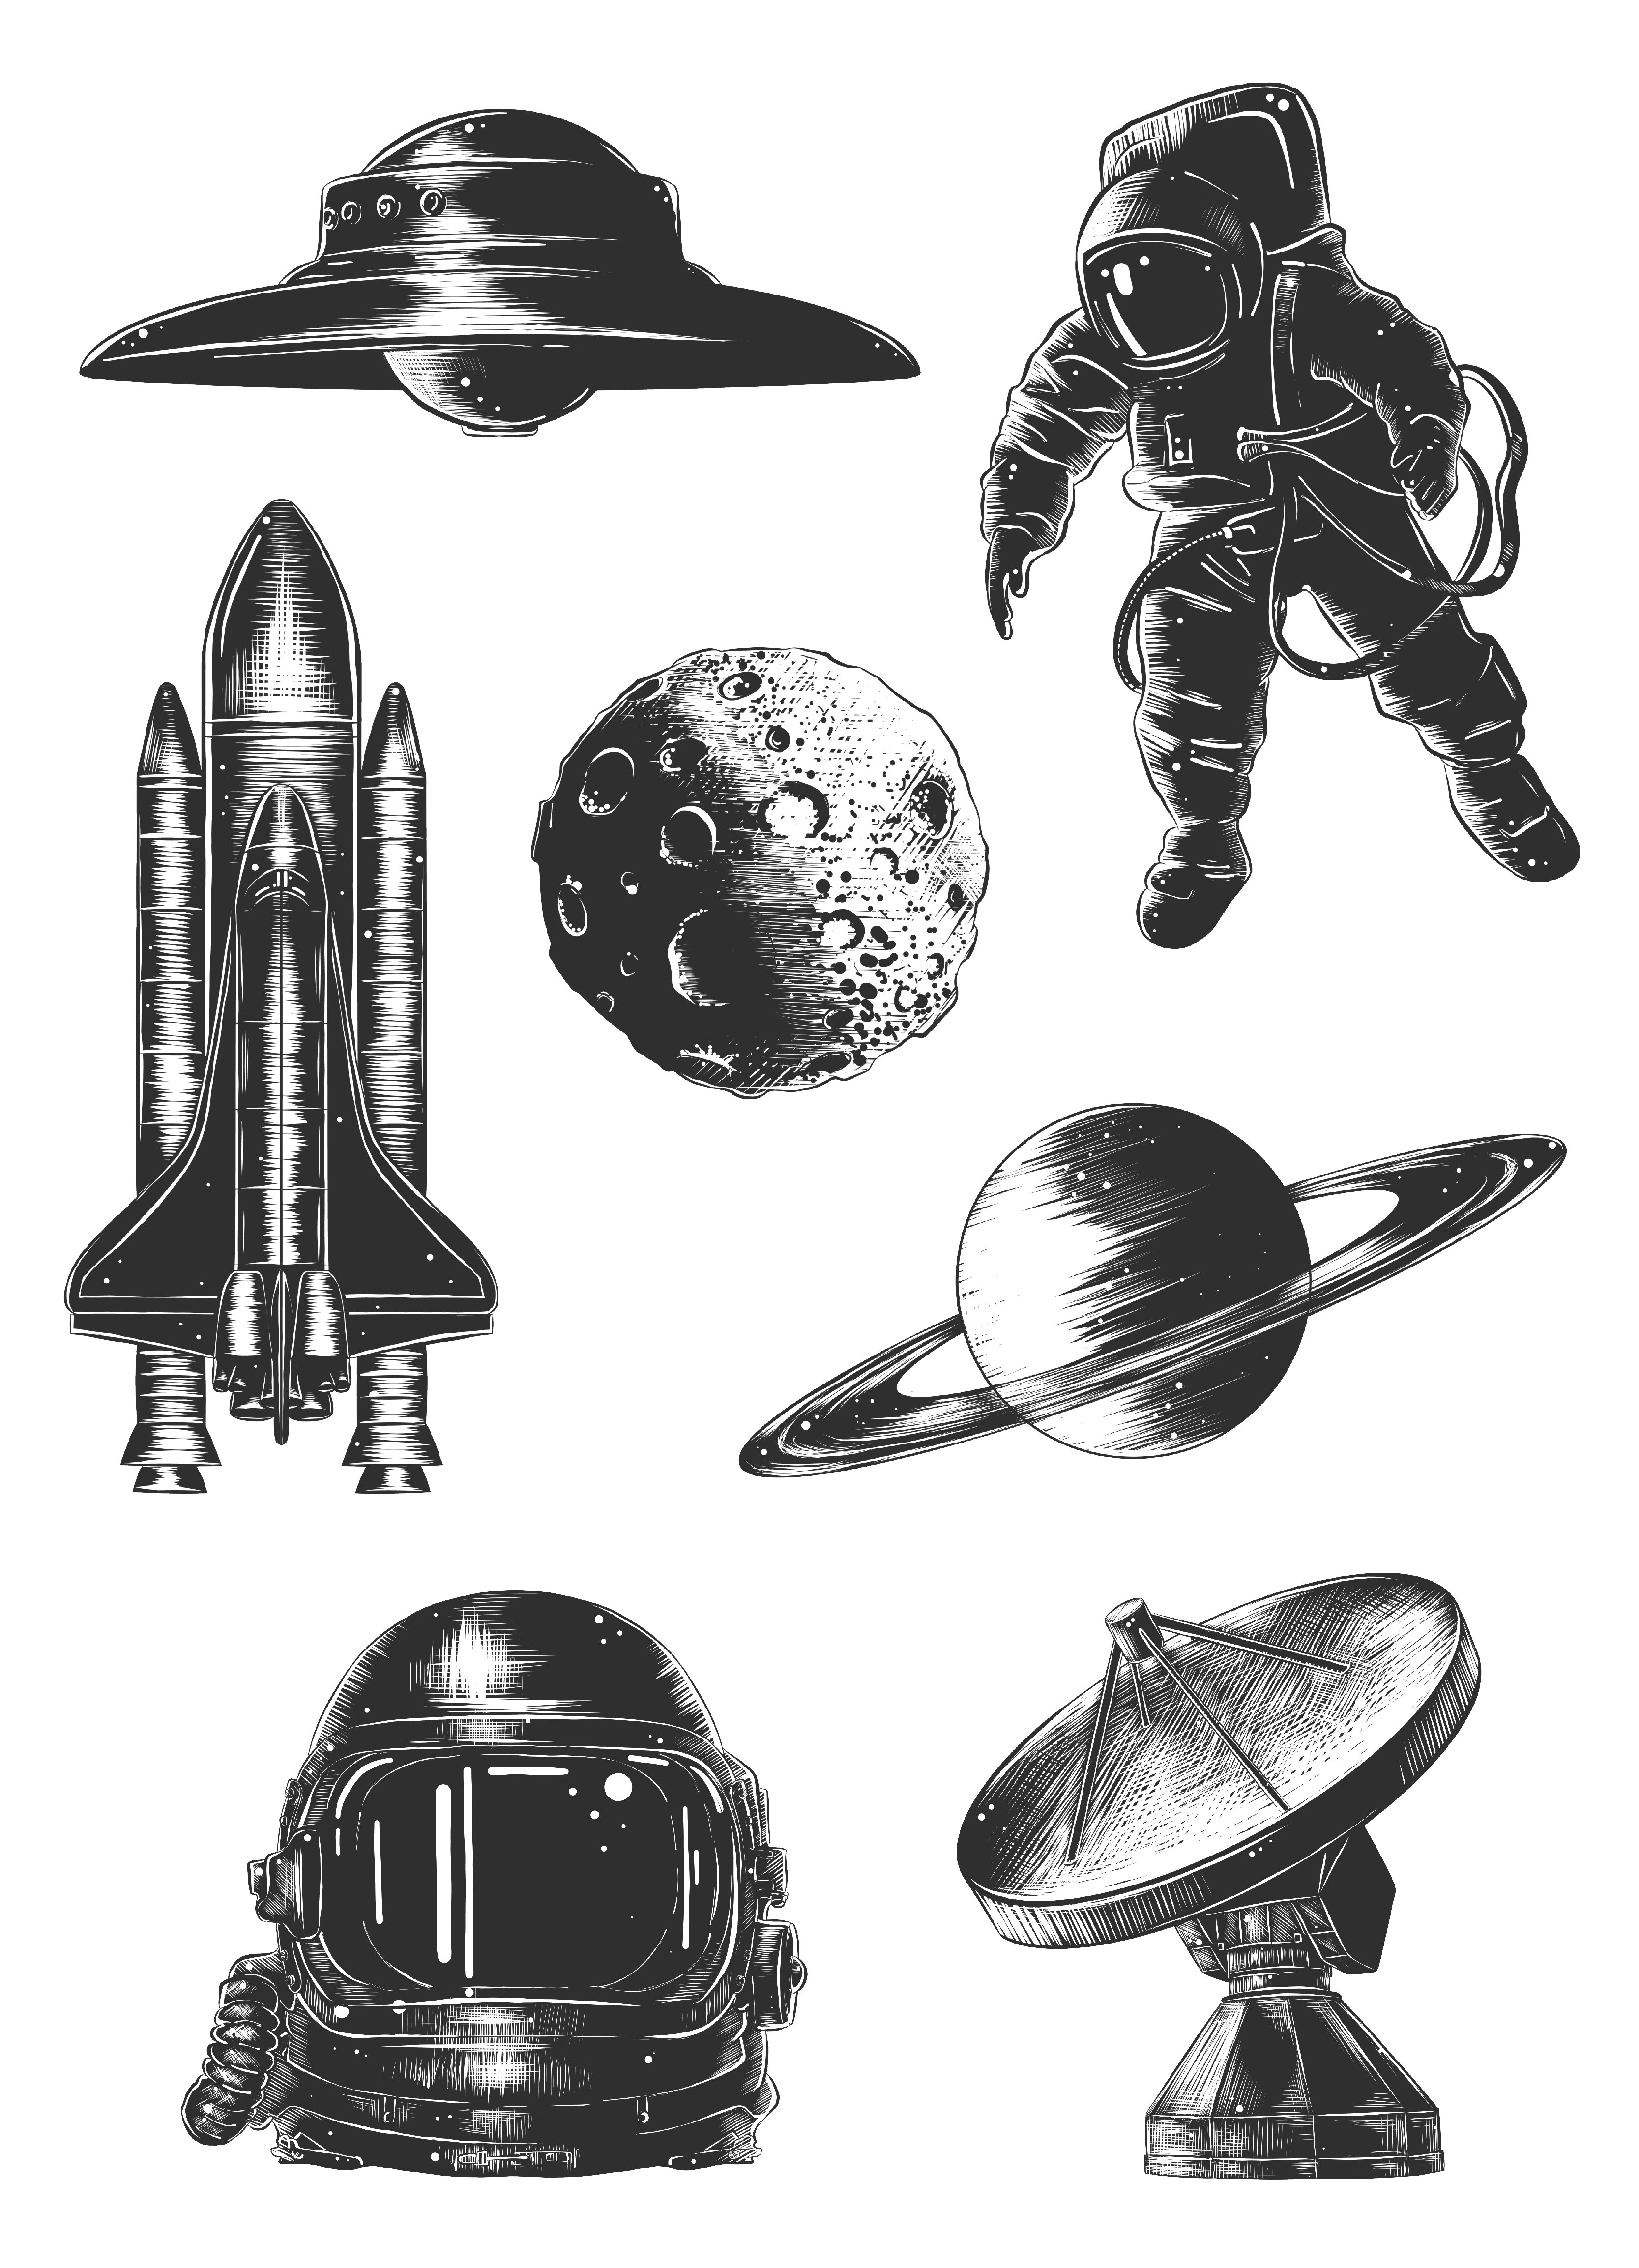 Bunch of different types of objects in black and white.